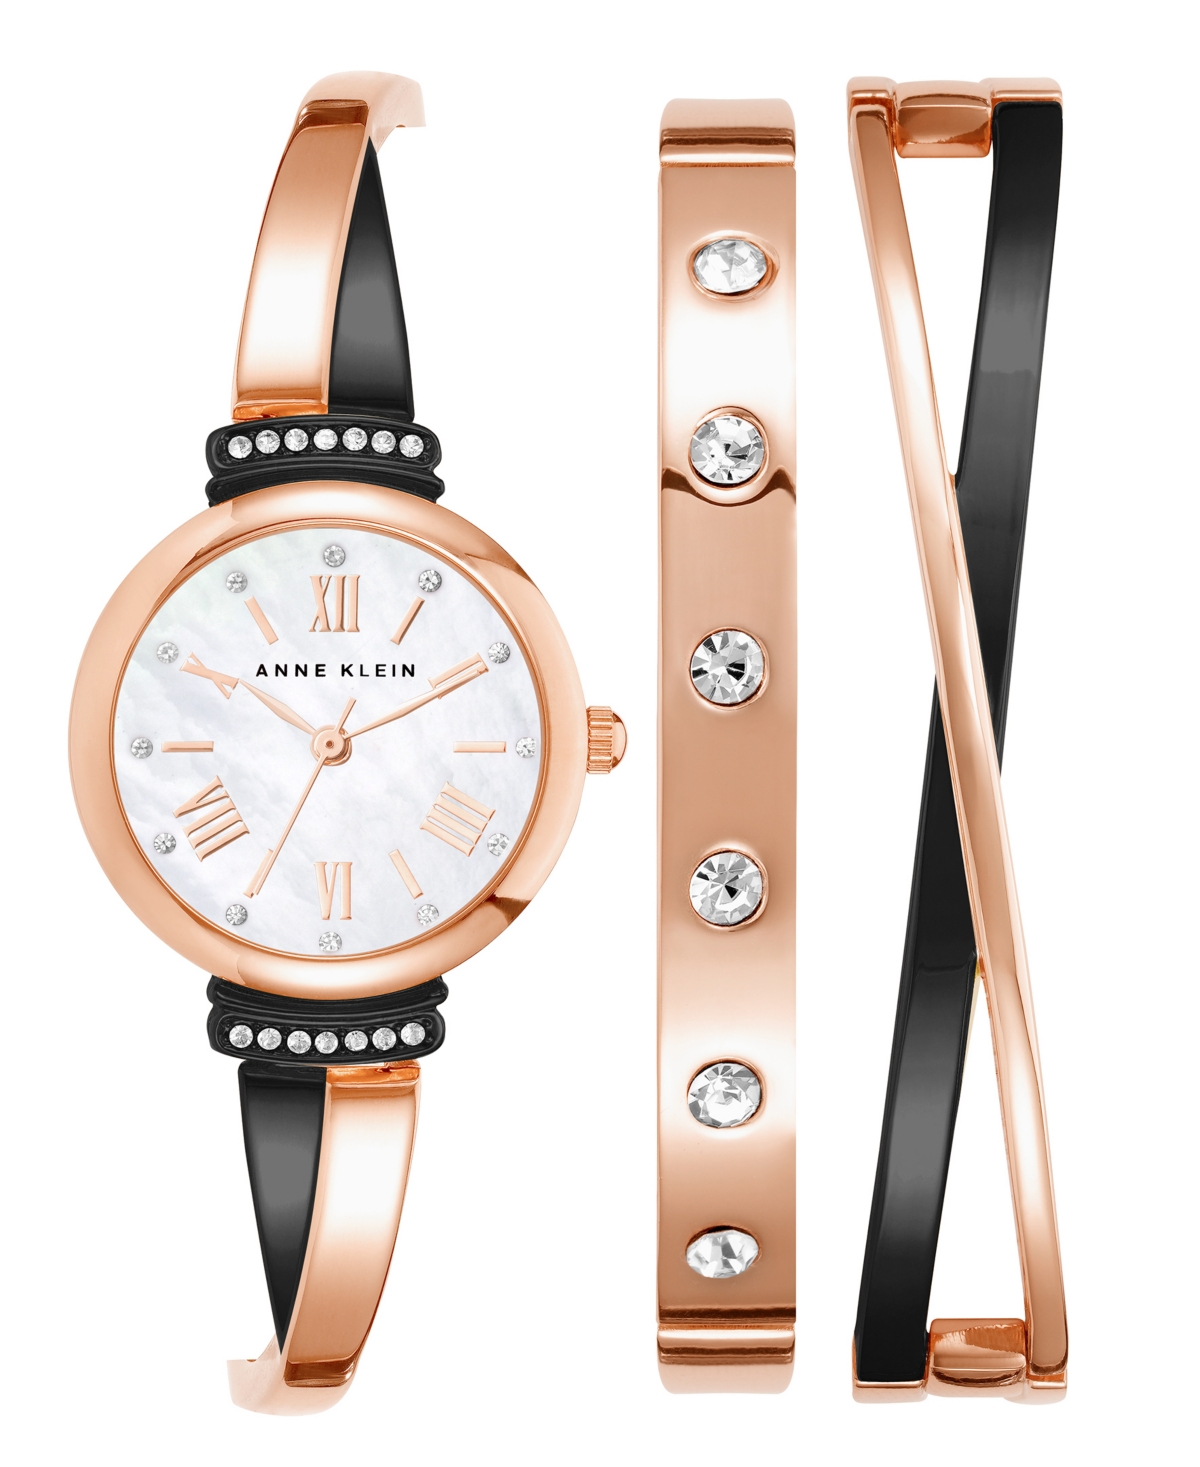 Women's Rose Gold-Tone and Black Alloy Bangle with Crystal Accents Fashion Watch 33mm Set 3 Pieces - Rose Gold-Tone, Black